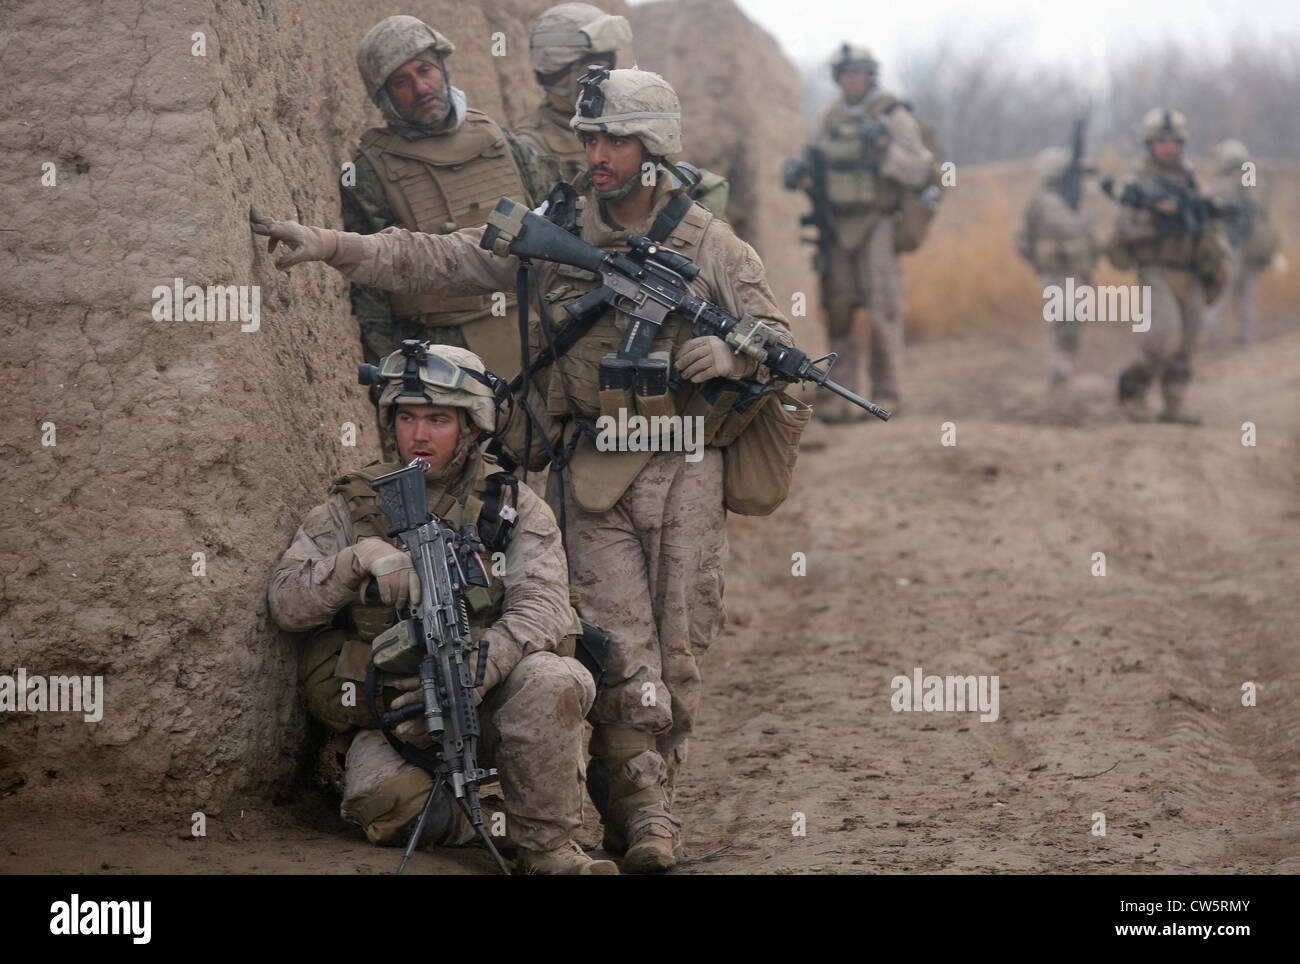 US Marines investigate a possible improvised explosive device while on a patrol February 2, 2010 in Helmand province, Afghanistan. Stock Photo